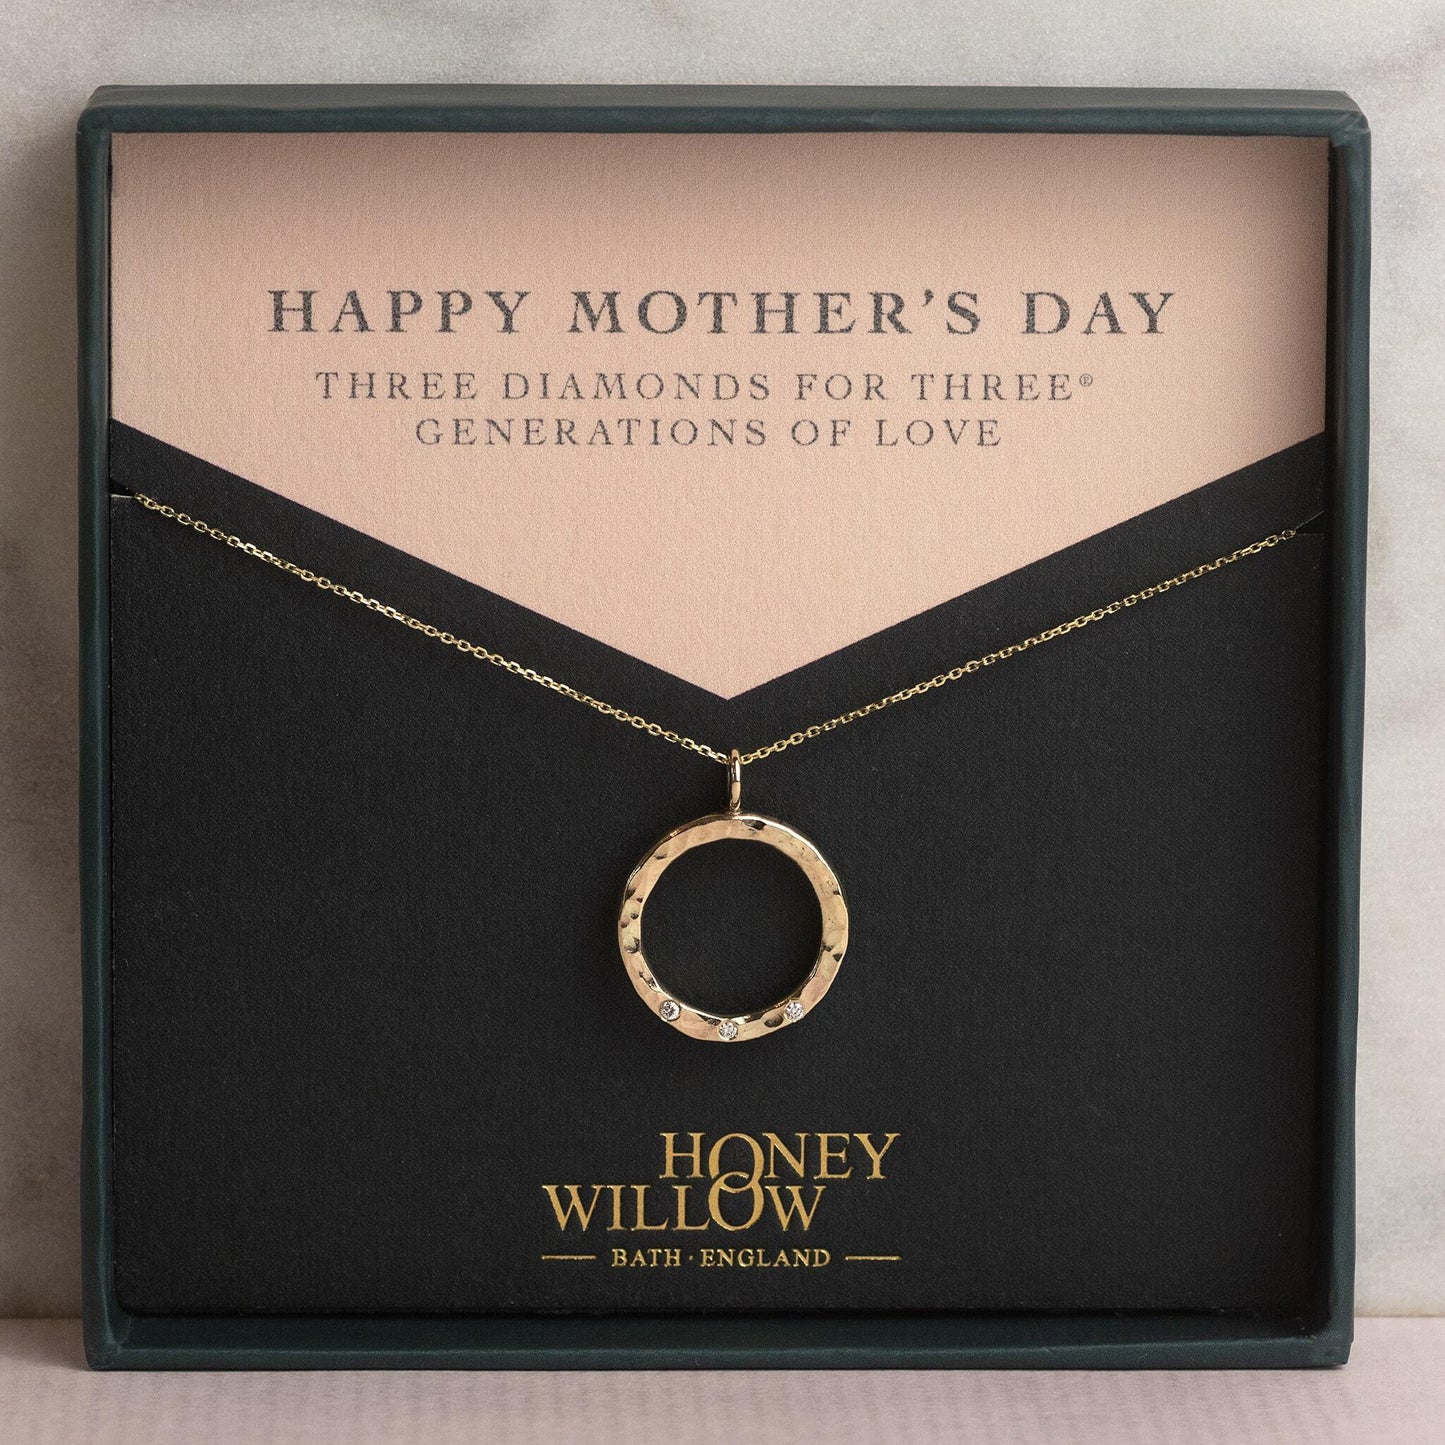 Mother's Day Gift - Recycled 9kt Gold Diamond Halo Necklace - 3 Diamonds for 3® Generations